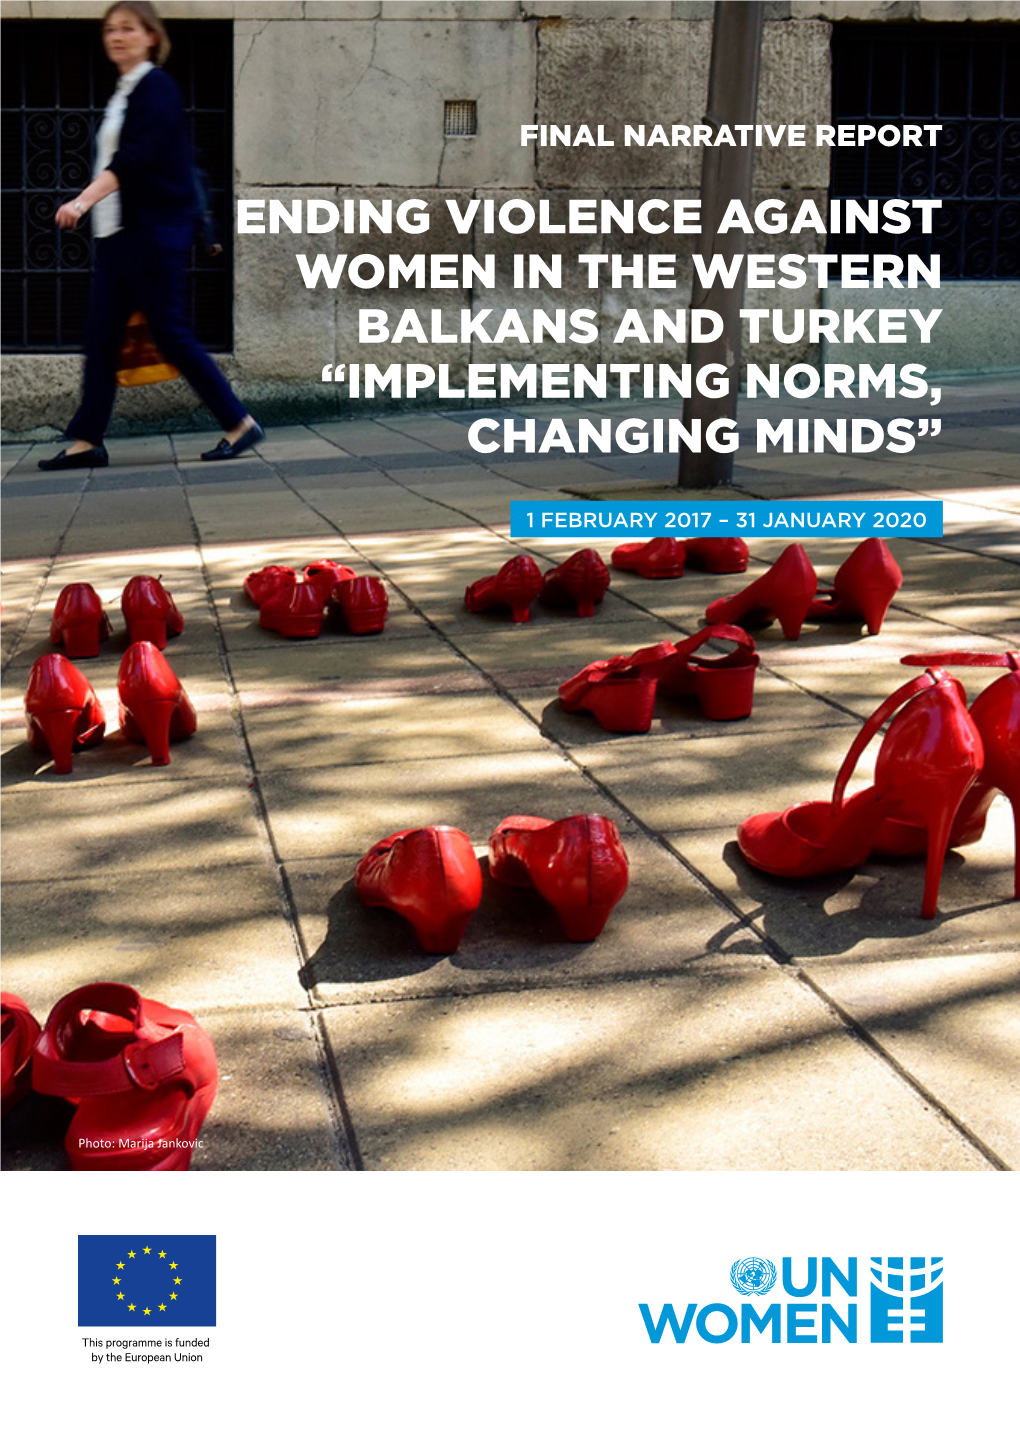 Ending Violence Against Women in the Western Balkans and Turkey “Implementing Norms, Changing Minds”